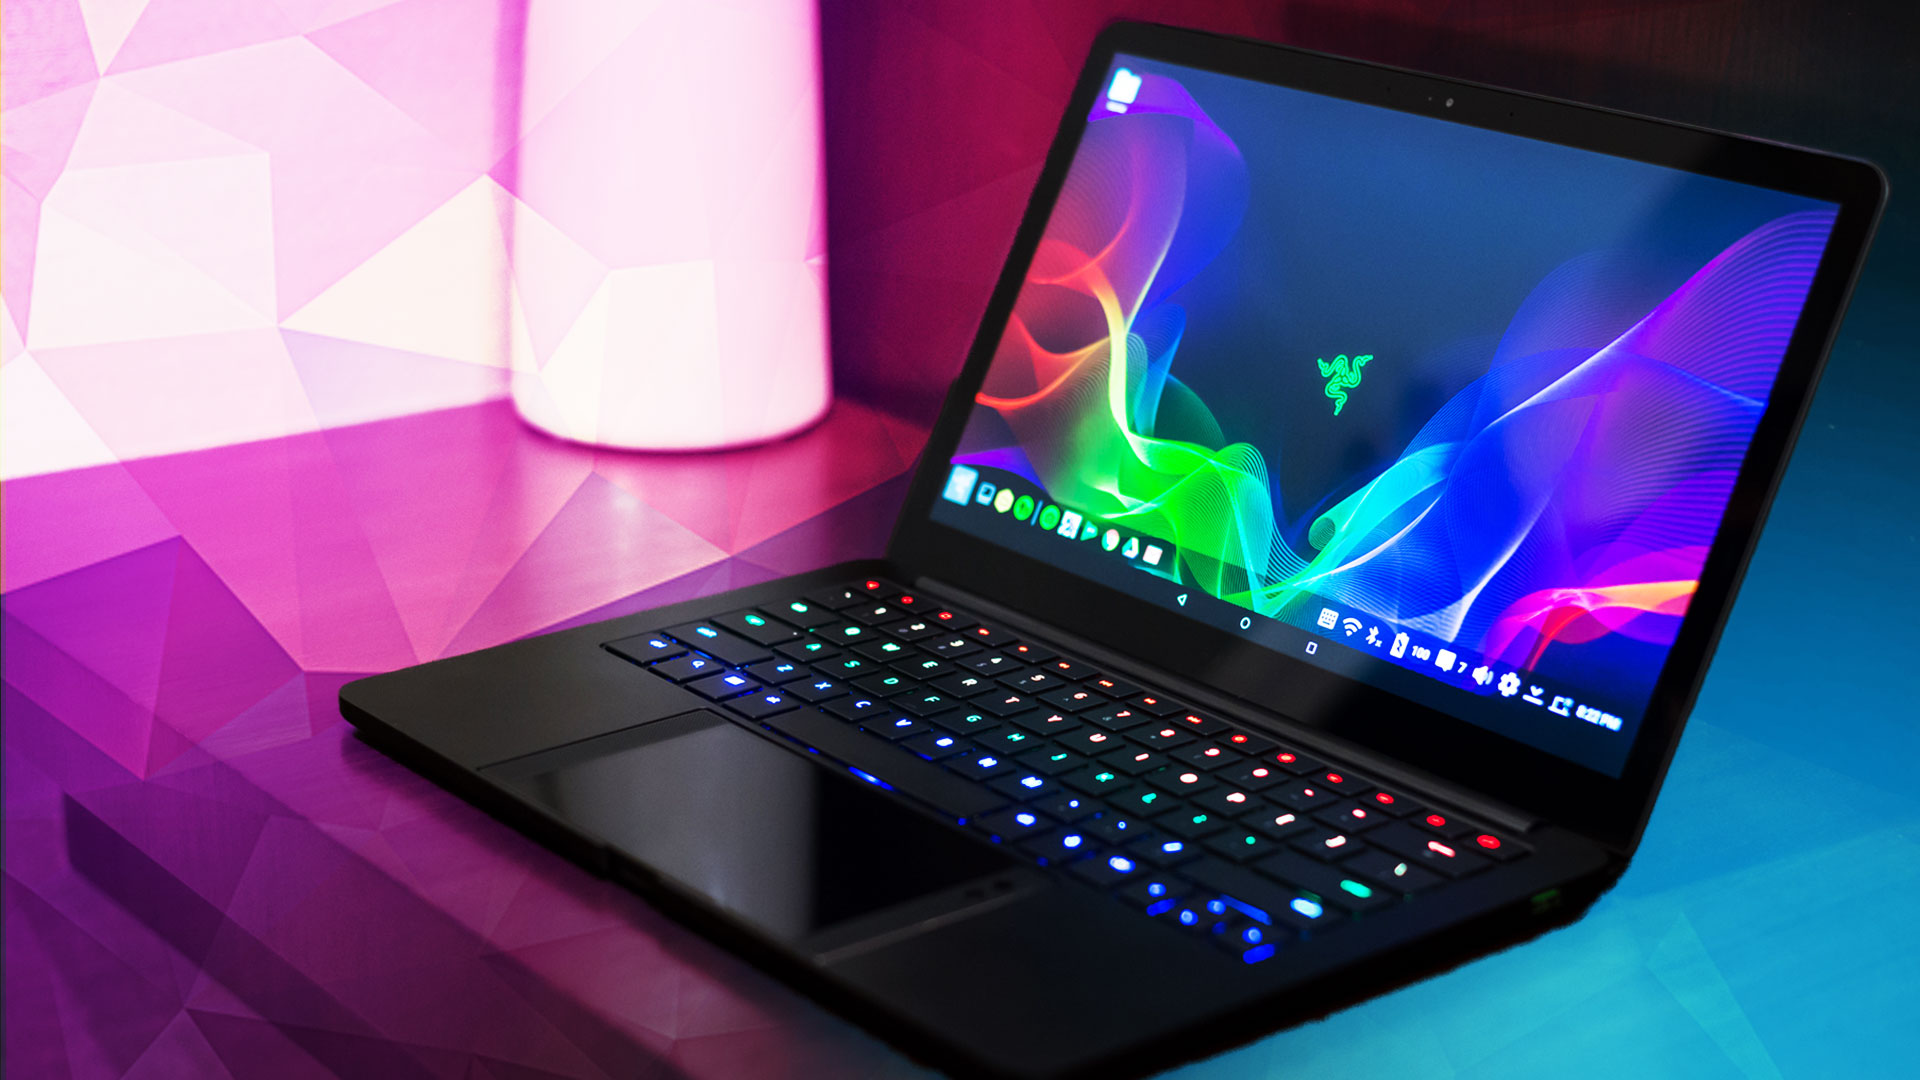 Razer Project Linda hands-on: Your Razer becomes the brain of laptop - Android Authority